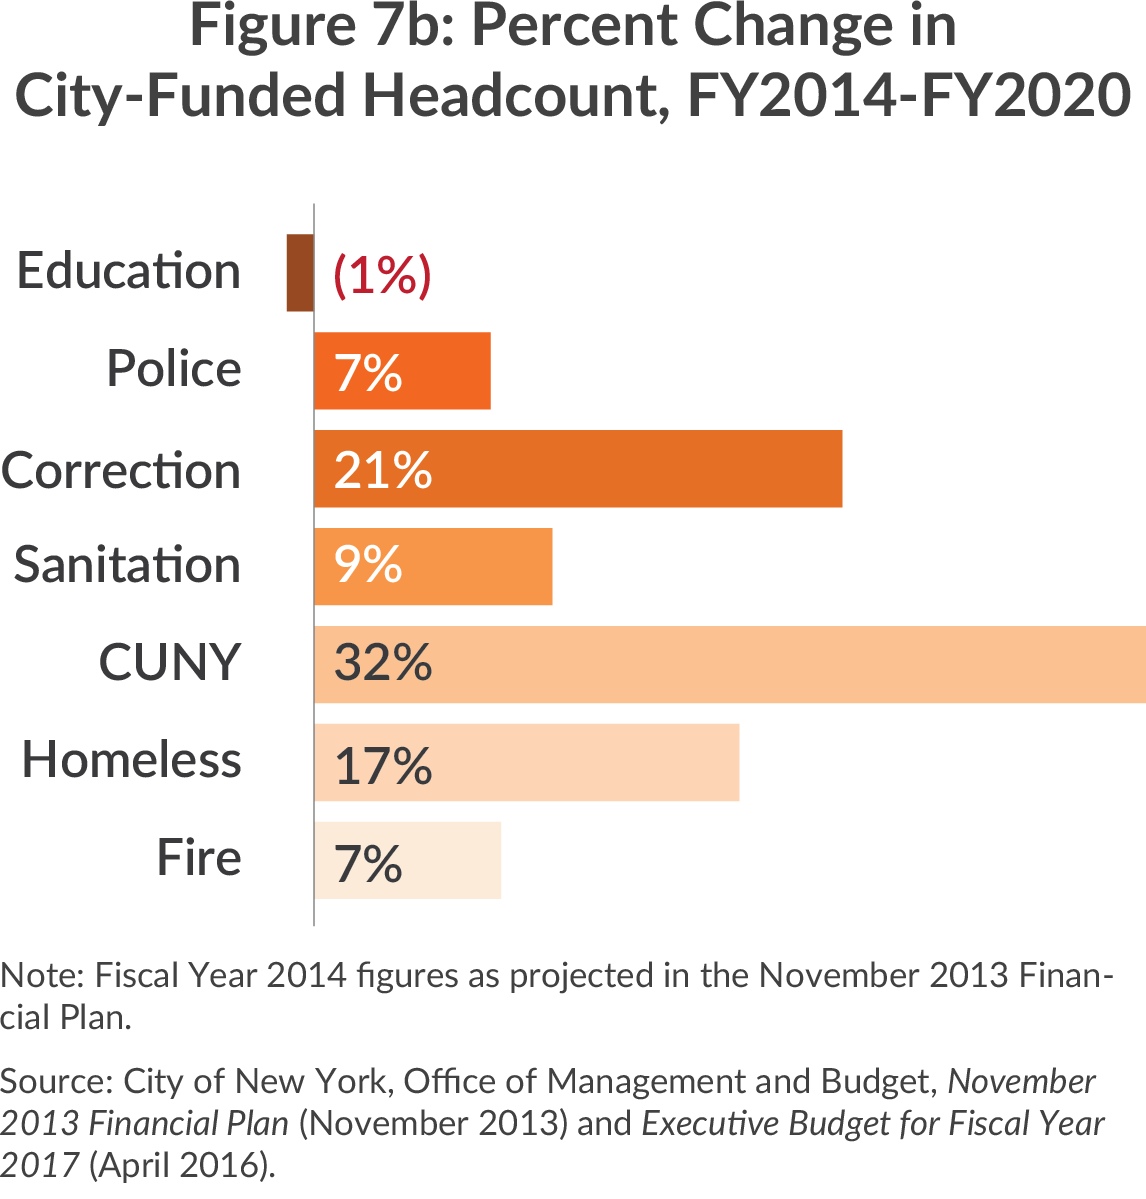 Percent change in city-funded headcount, fy2014-2020